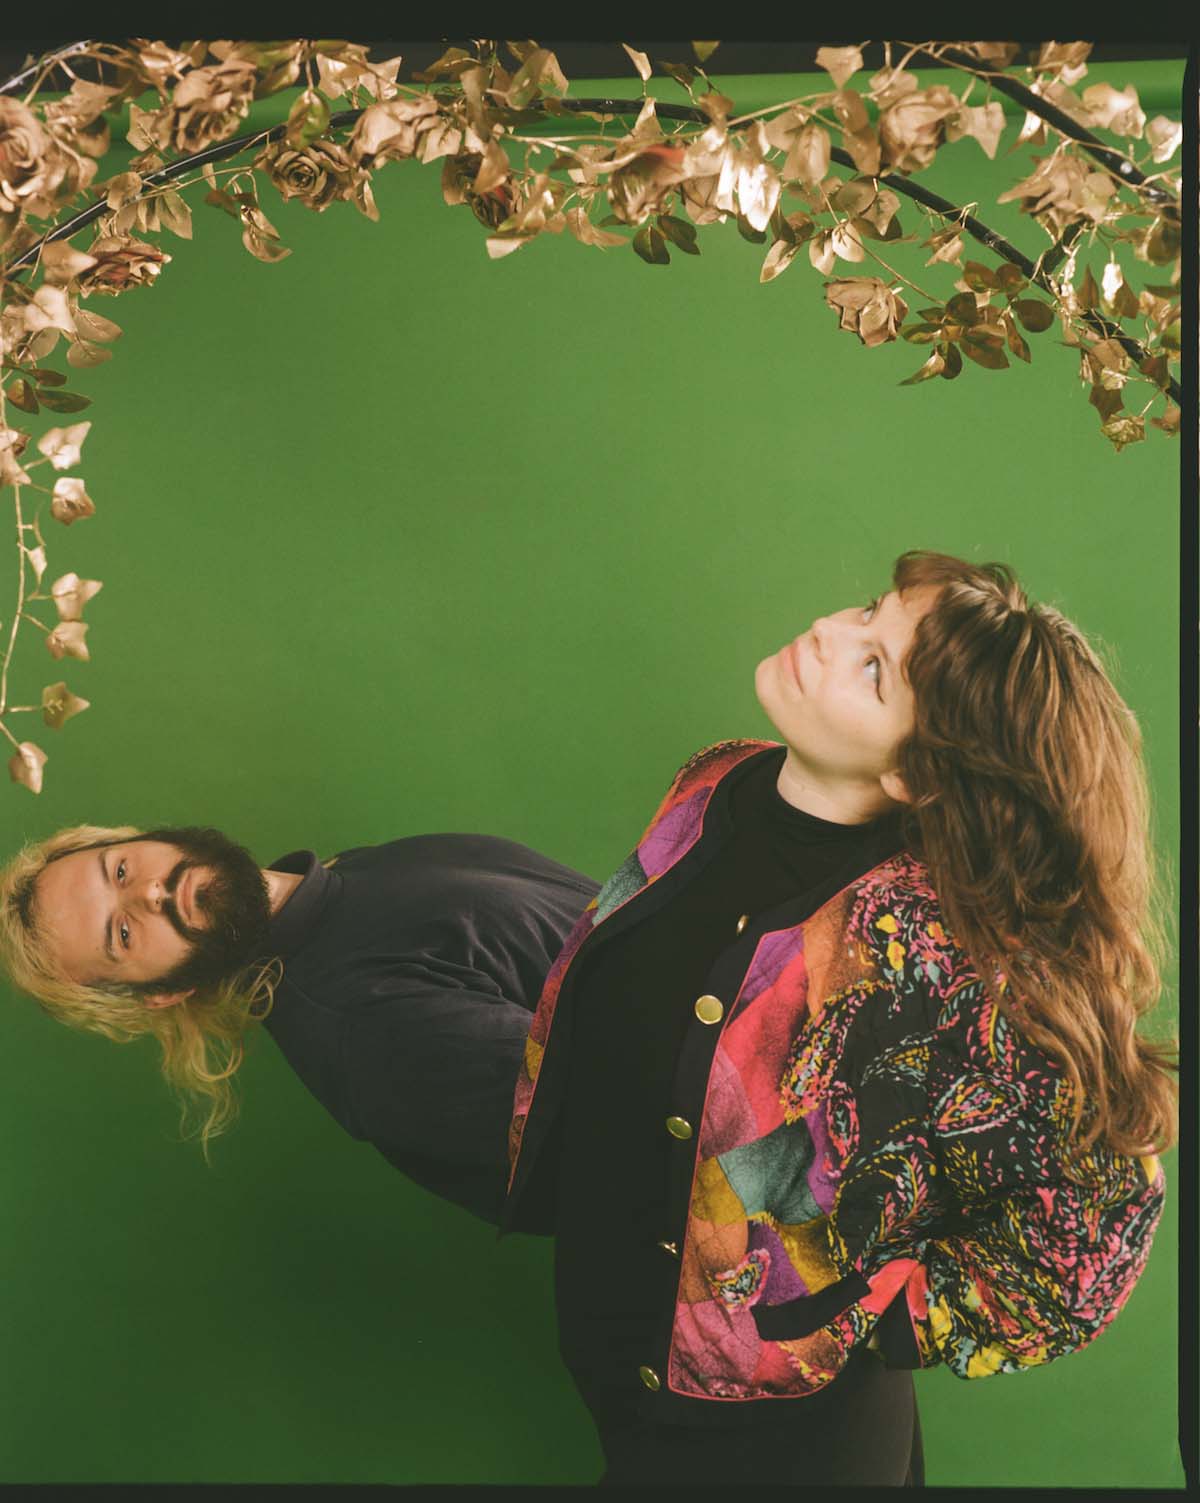 The band Freelove can be seen against a green background, above the woman and the man are branches with golden leaves and flowers. The woman stands on the right, wears a colourful blouson with golden buttons over her otherwise black clothes, has her hands in her trouser pockets and looks up at the branches. Her long brown hair falls down her arms and back. The man stands behind her and looks into the camera, only his upper body can be seen, which he bends almost horizontally to the left. He has a full black beard and a blond-dyed mullet.